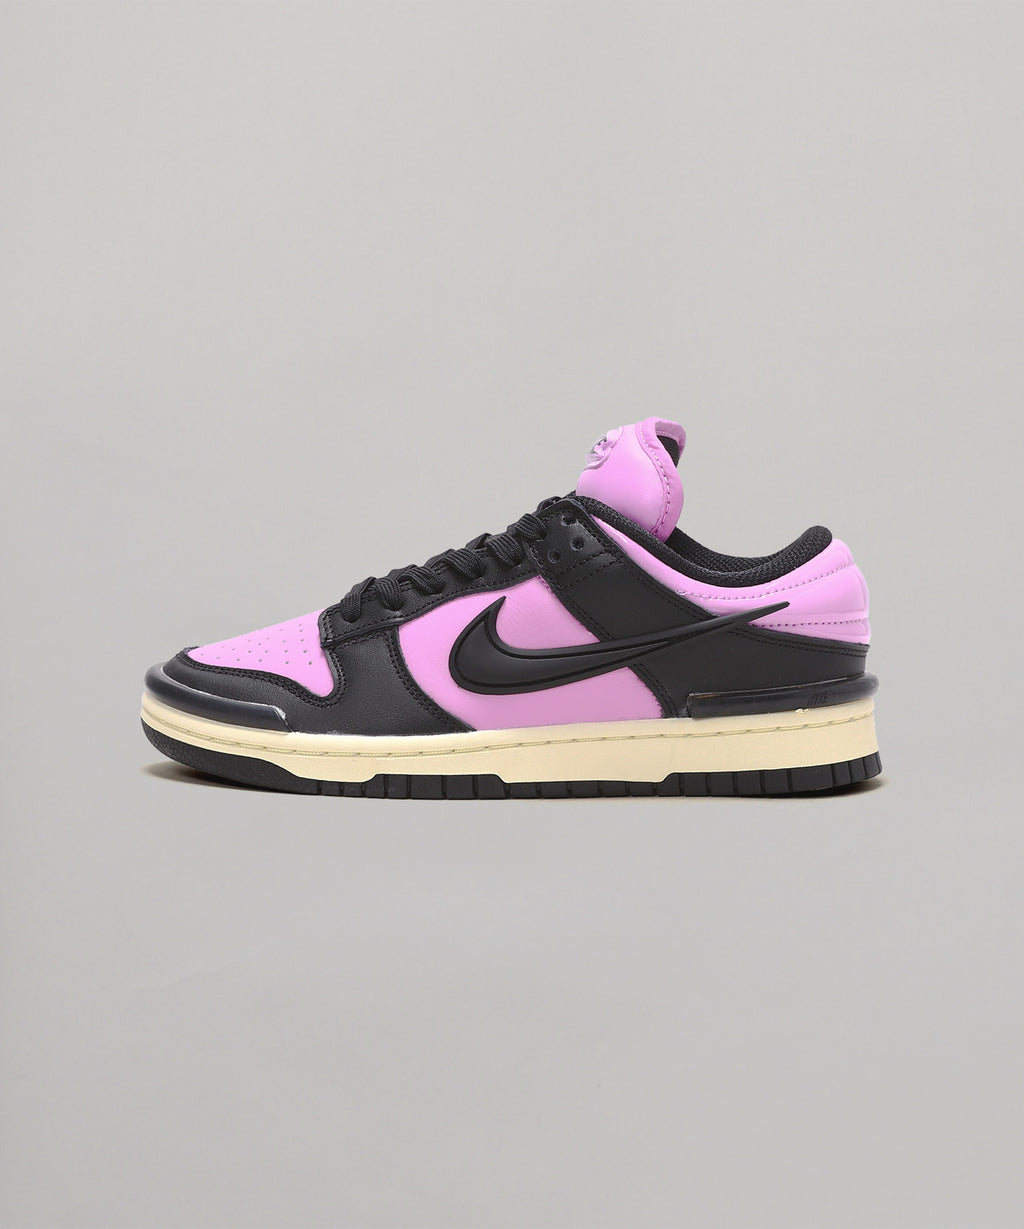 Nike WMNS Dunk Low "Harvest Moon" 24.0